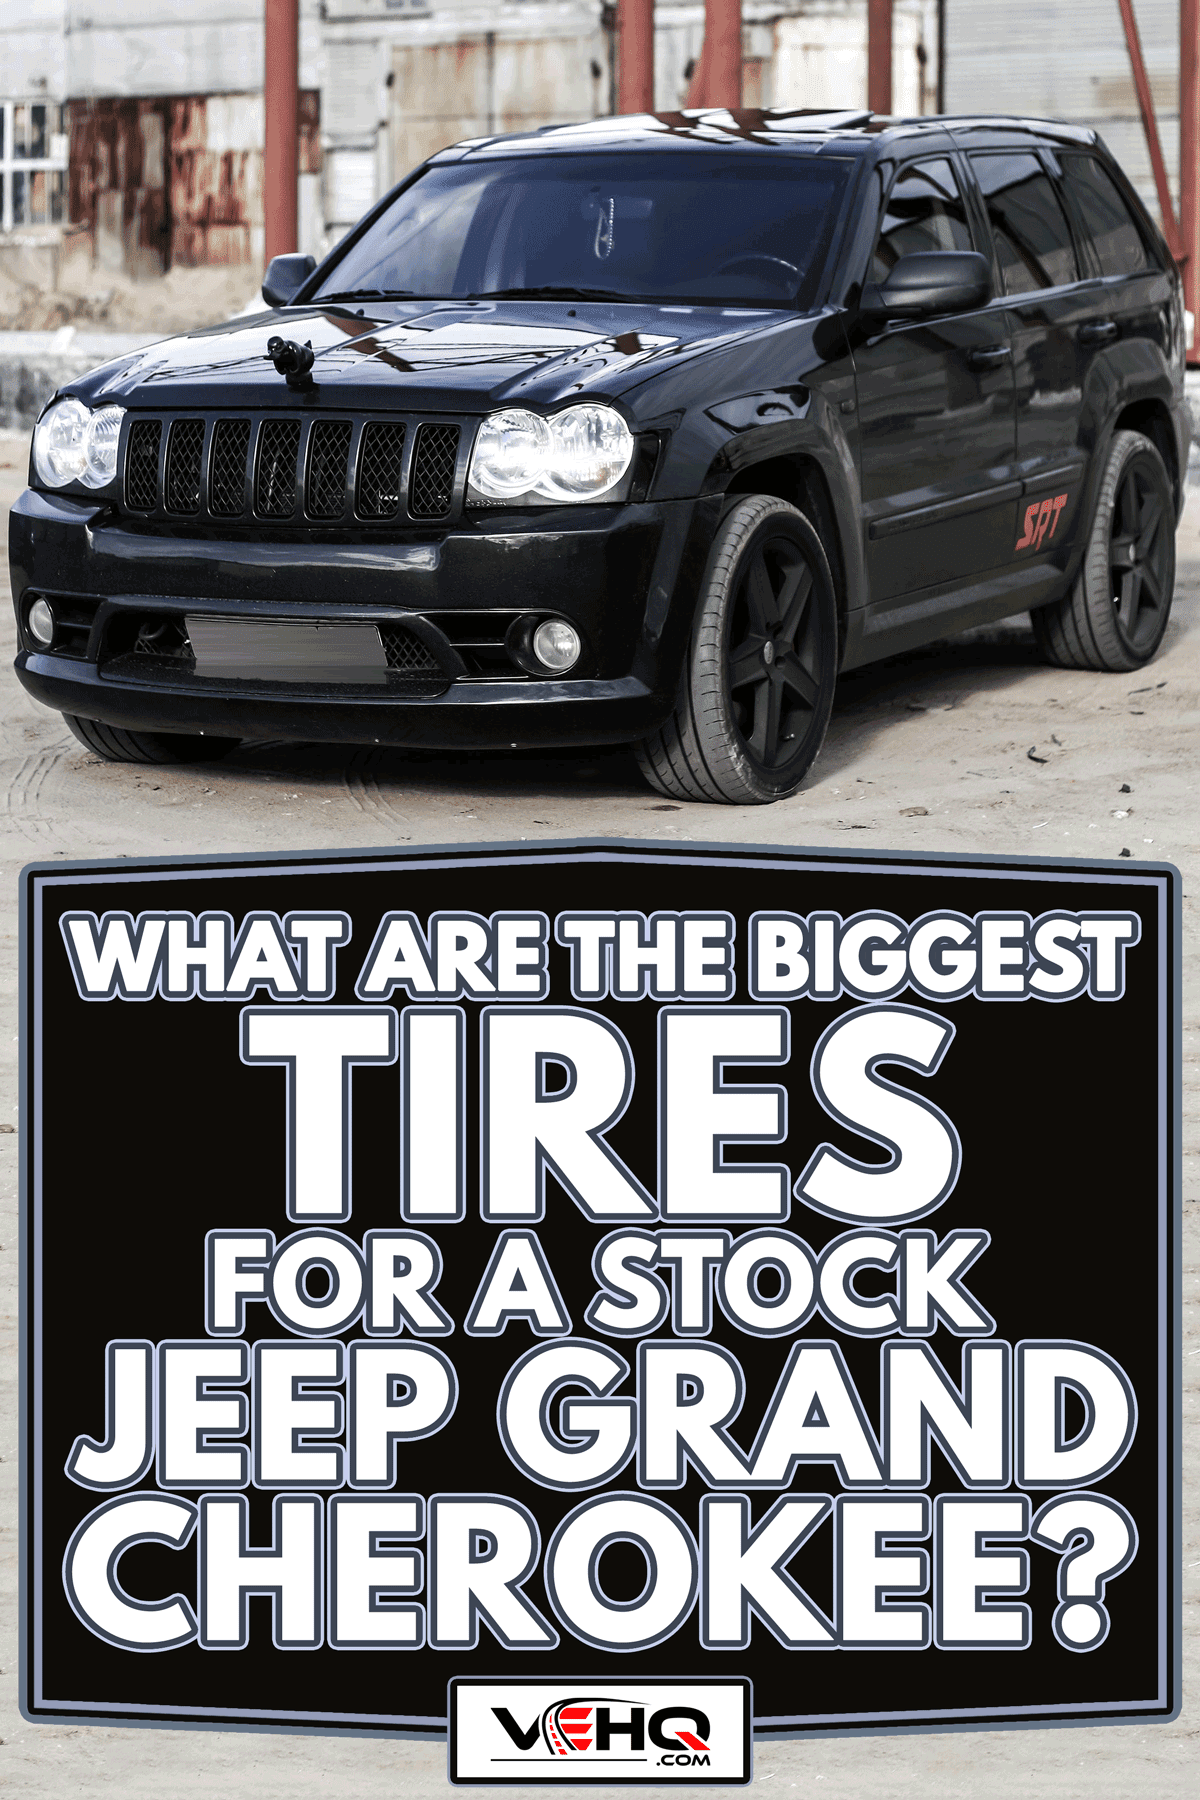 Off-road car Jeep Grand Cherokee SRT-8 in the industrial area, What Are The Biggest Tires For A Stock Jeep Grand Cherokee?